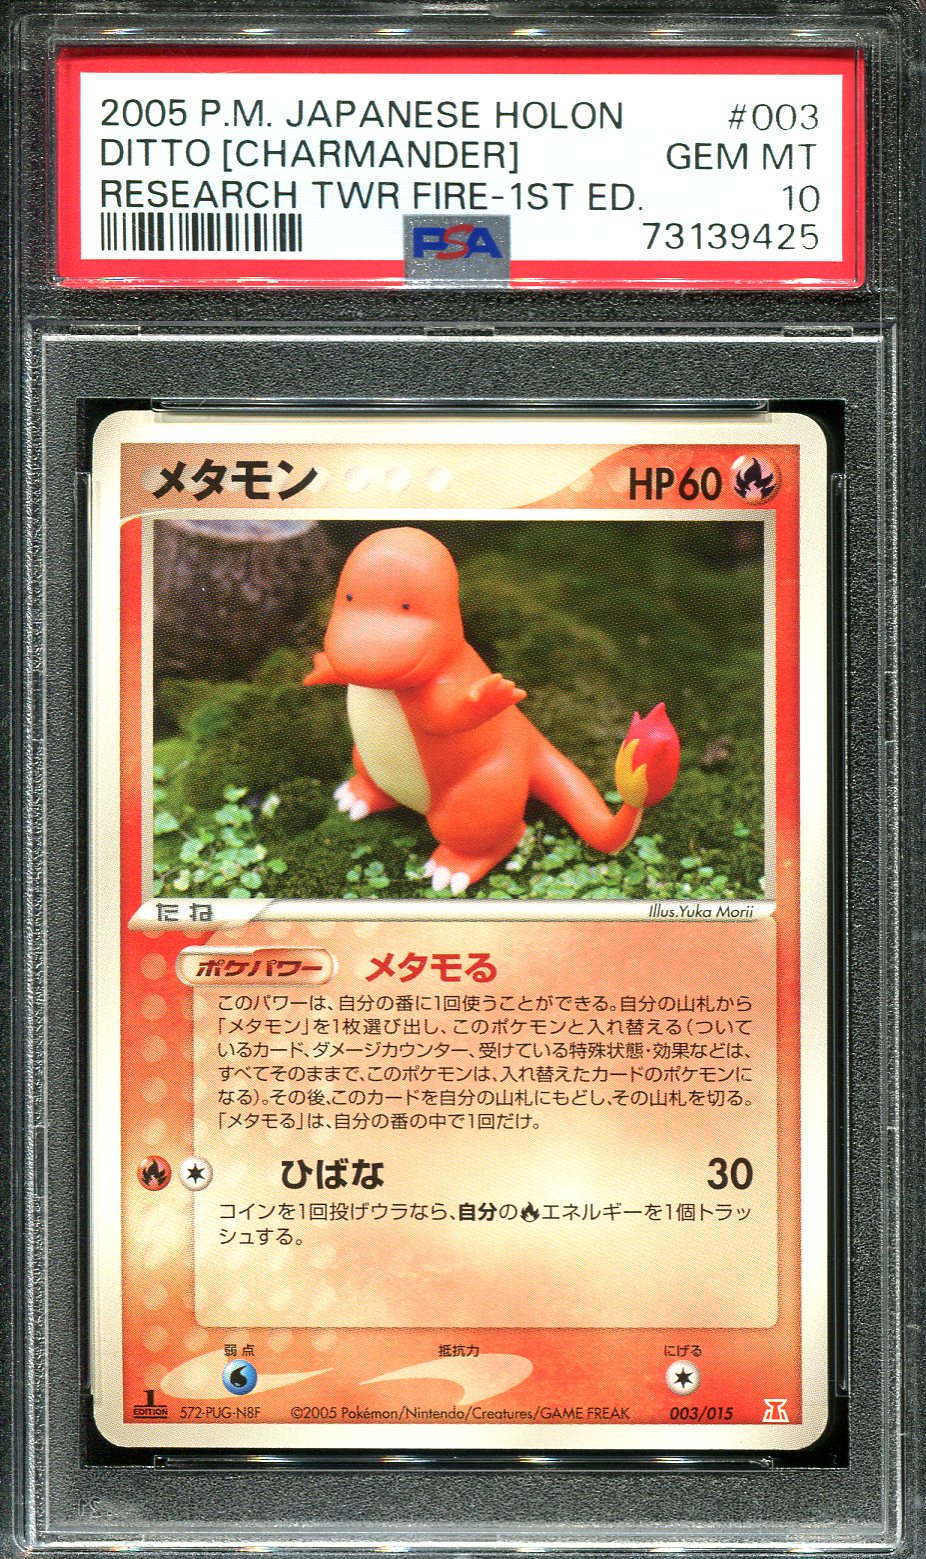 DITTO CHARMANDER 003/015 PSA 10 POKEMON RESEARCH TOWER JAPANESE